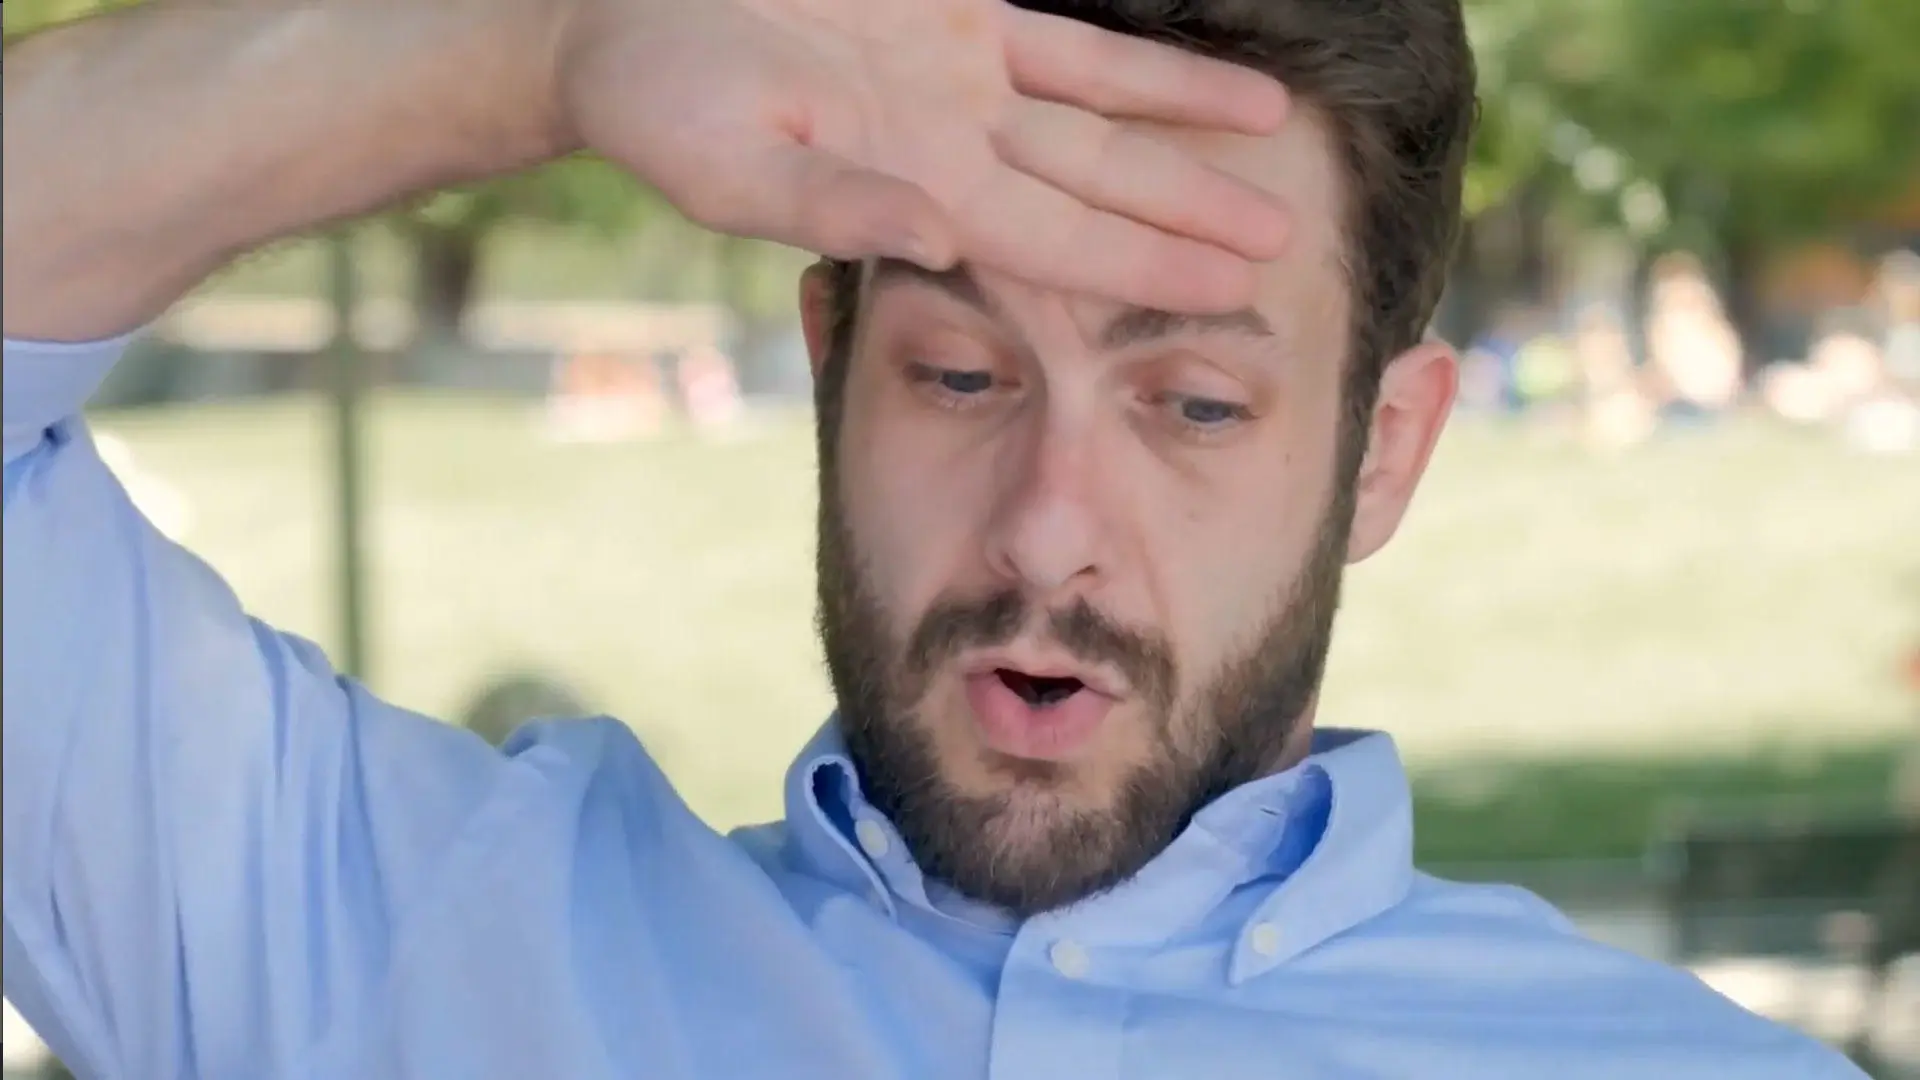 A video thumbnail of A bearded man wiping his forehead with the back of his hand